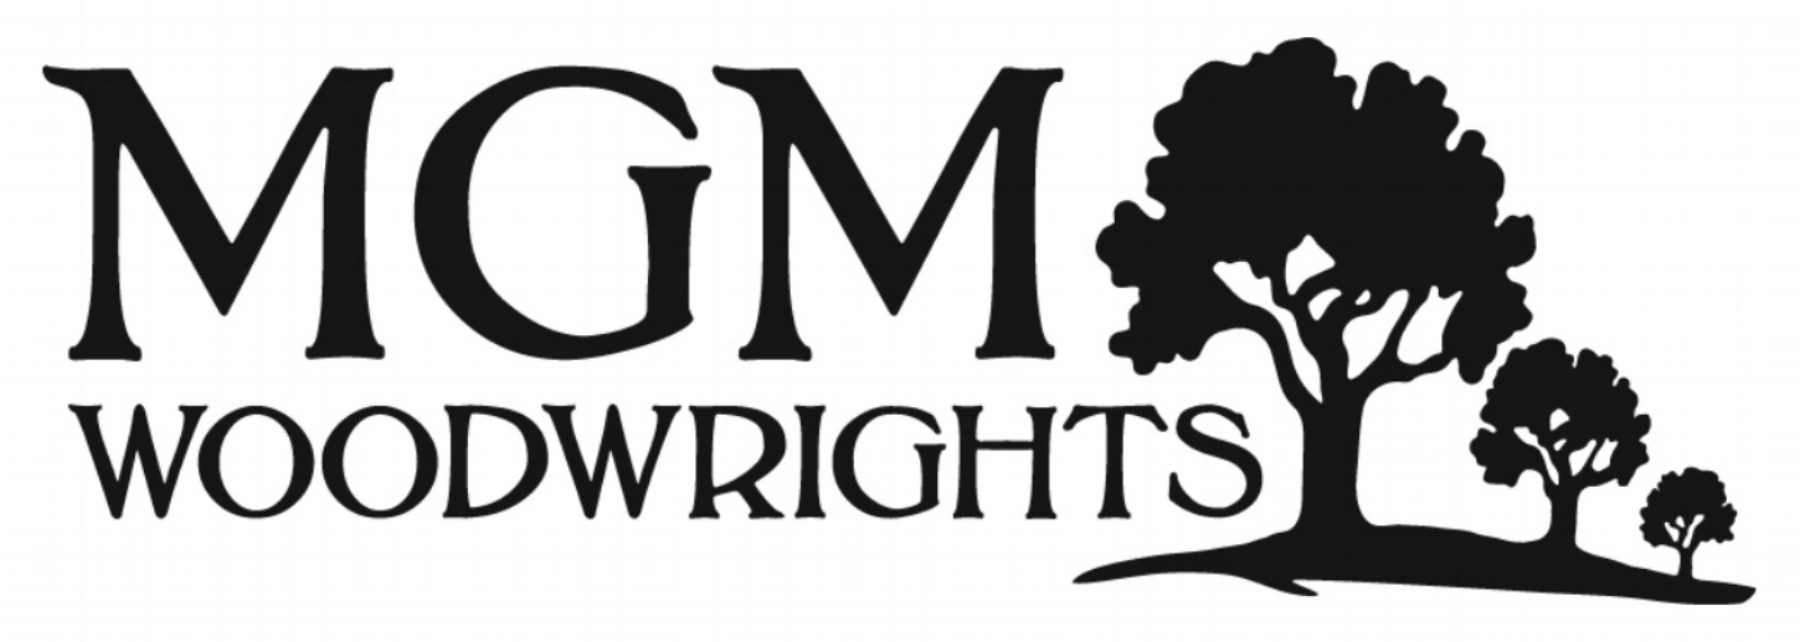 MGM WOODWRIGHTS